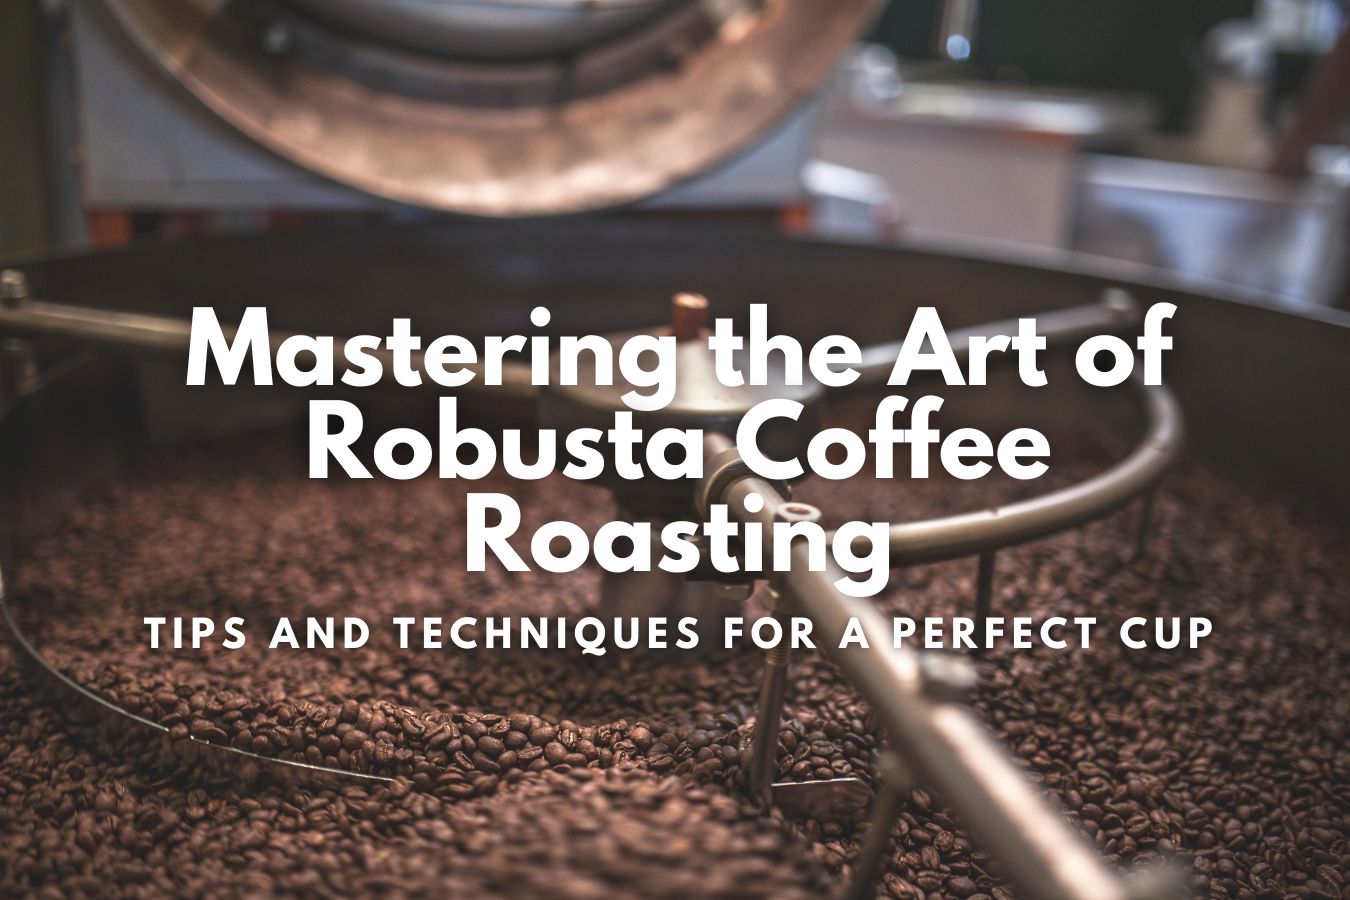 Mastering the Art of Robusta Coffee Roasting Tips and Techniques for a Perfect Cup